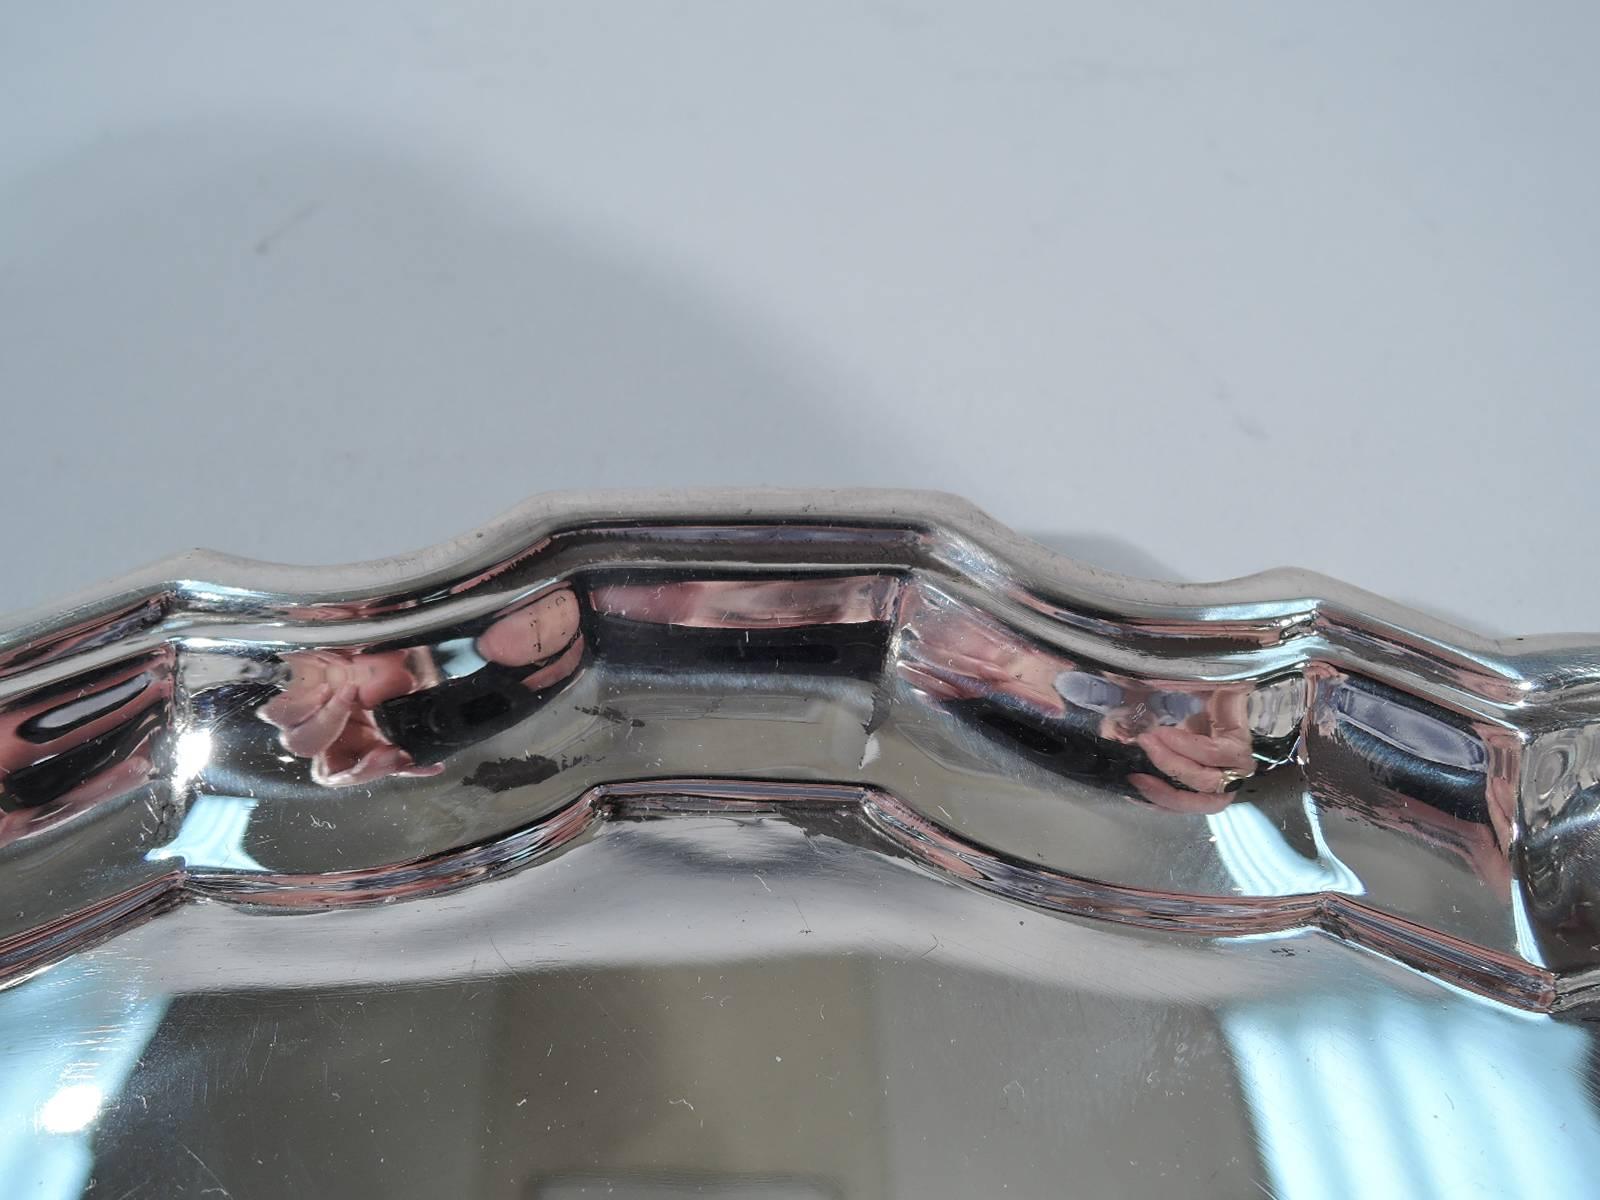 Georgian sterling silver tray. Made by Tiffany & Co. in New York. Circular with molded curvilinear piecrust rim. Hallmark includes pattern no. 21744 and director’s letter M (1947-1956).

Dimensions: H 3/8 W 14 x D 14 in. Heavy weight: 43 troy